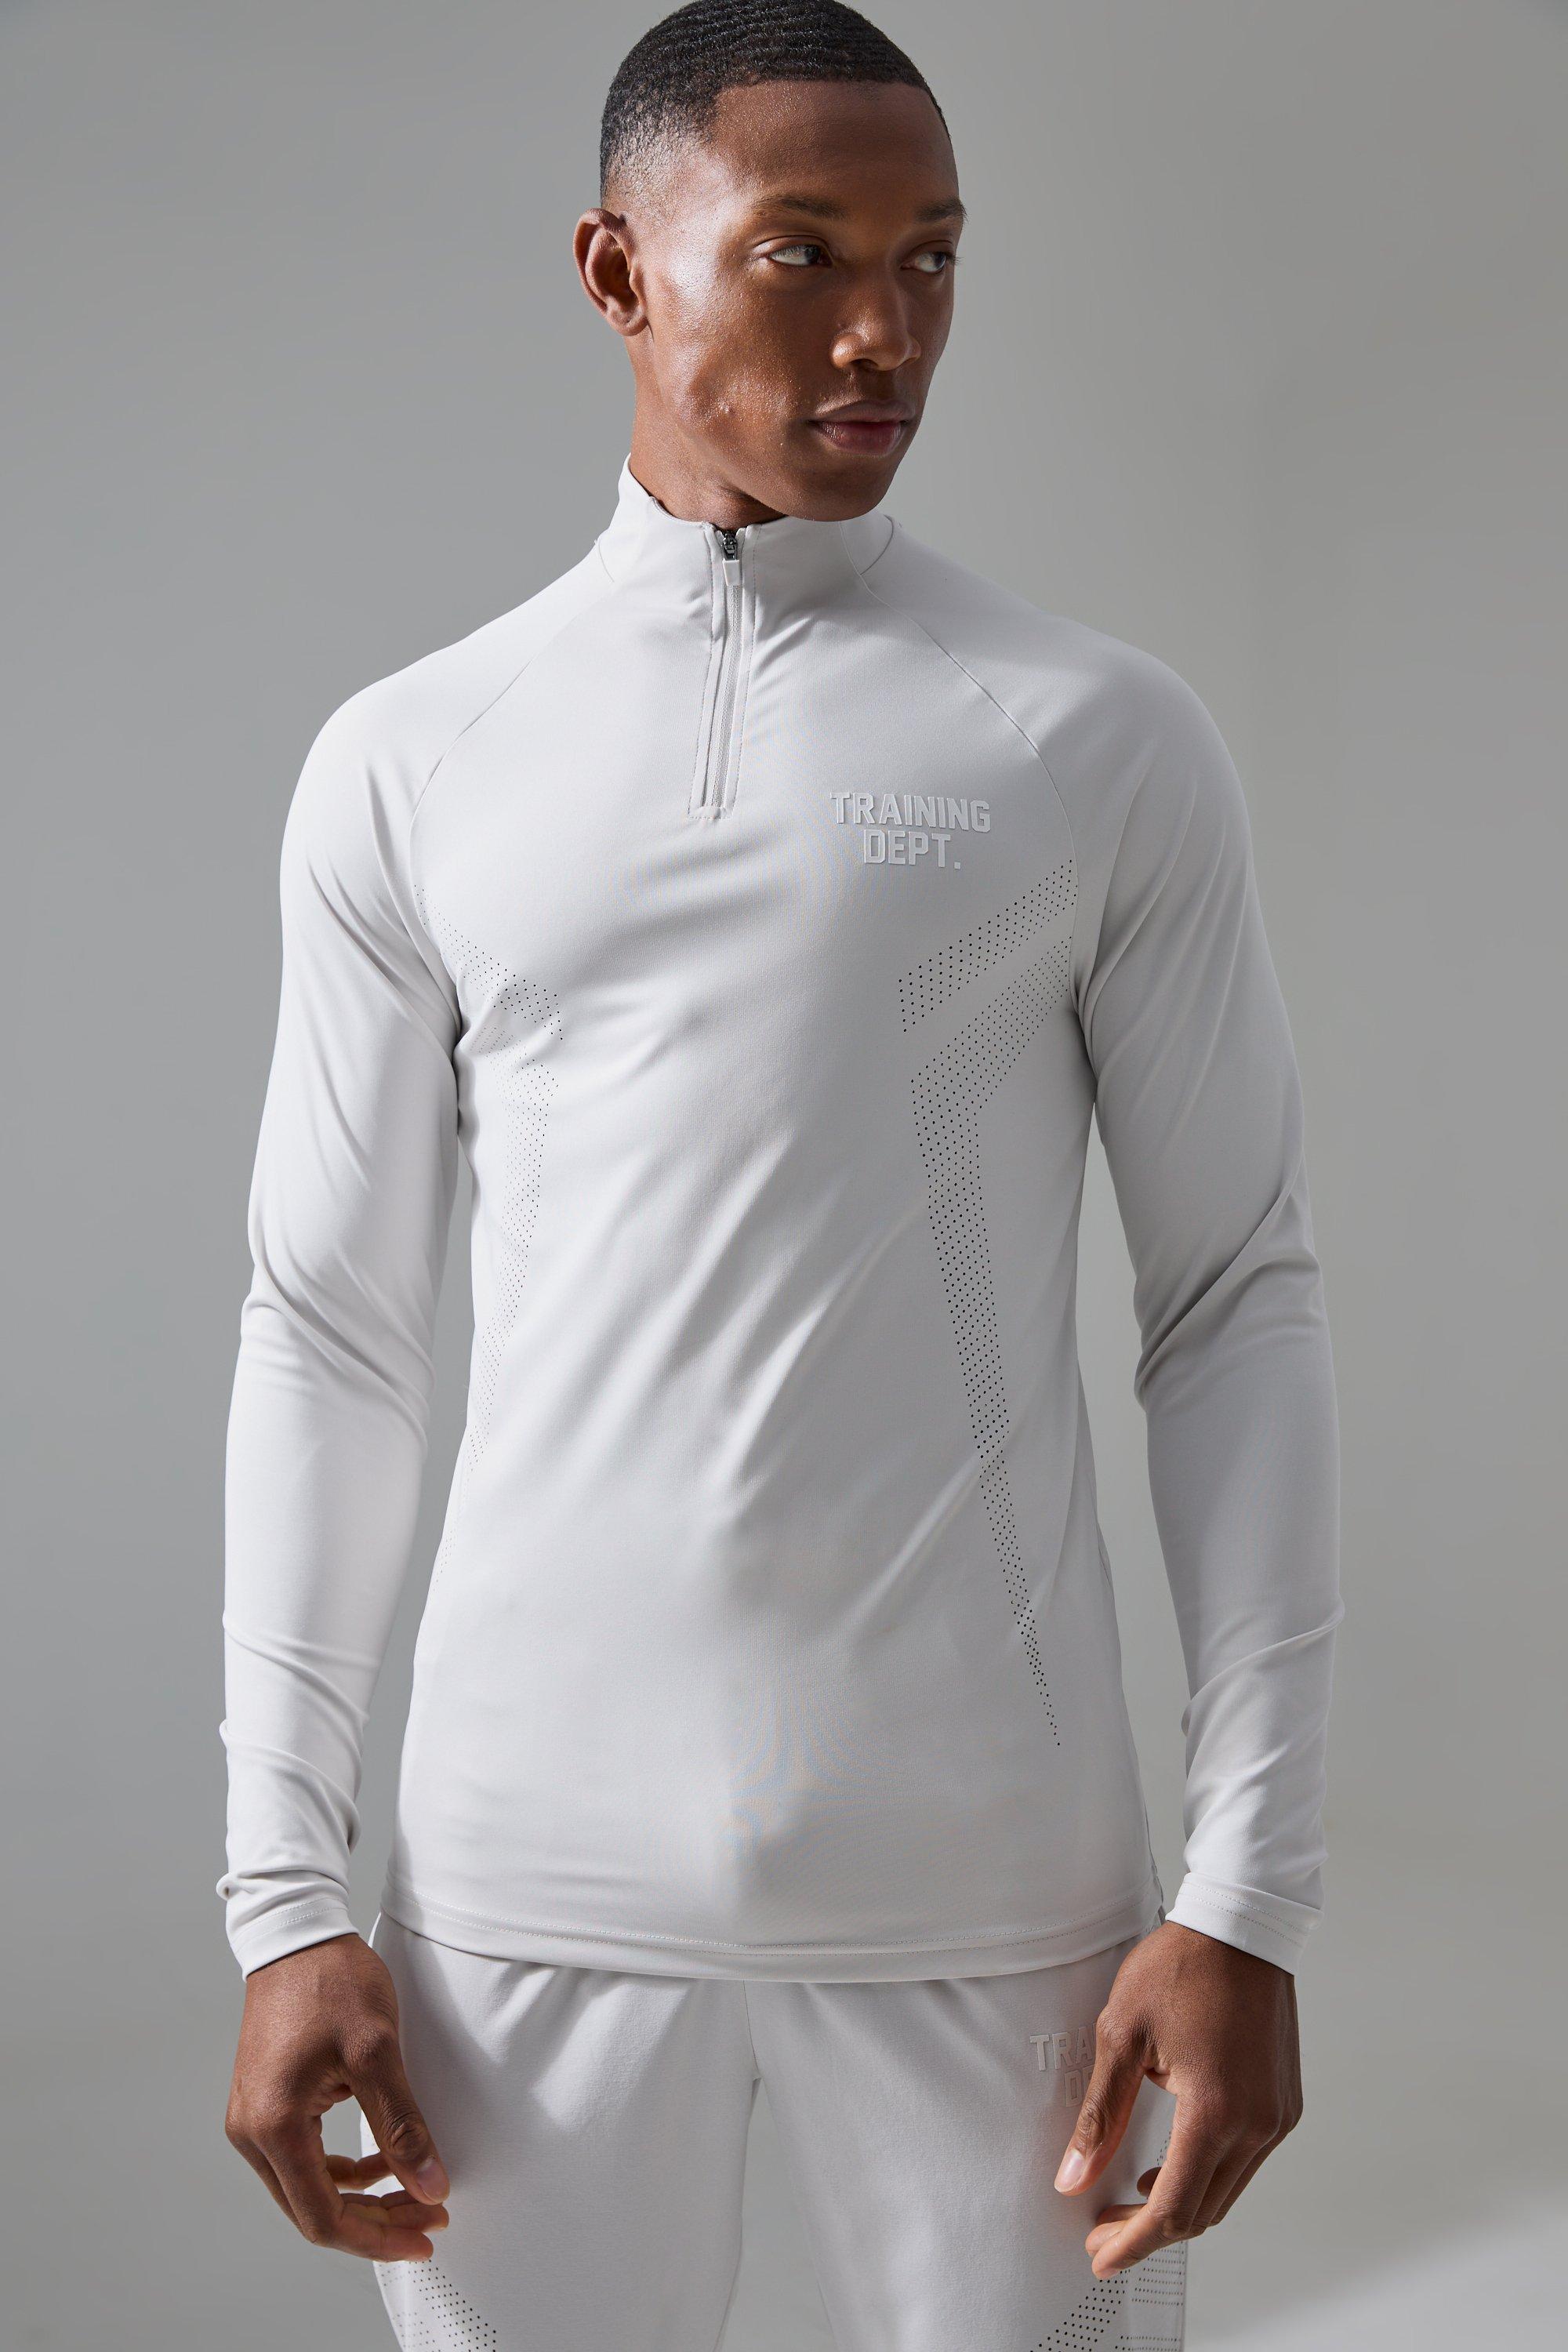 Image of Active Training Dept Muscle Fit Perforated Quarter Zip Top, Grigio